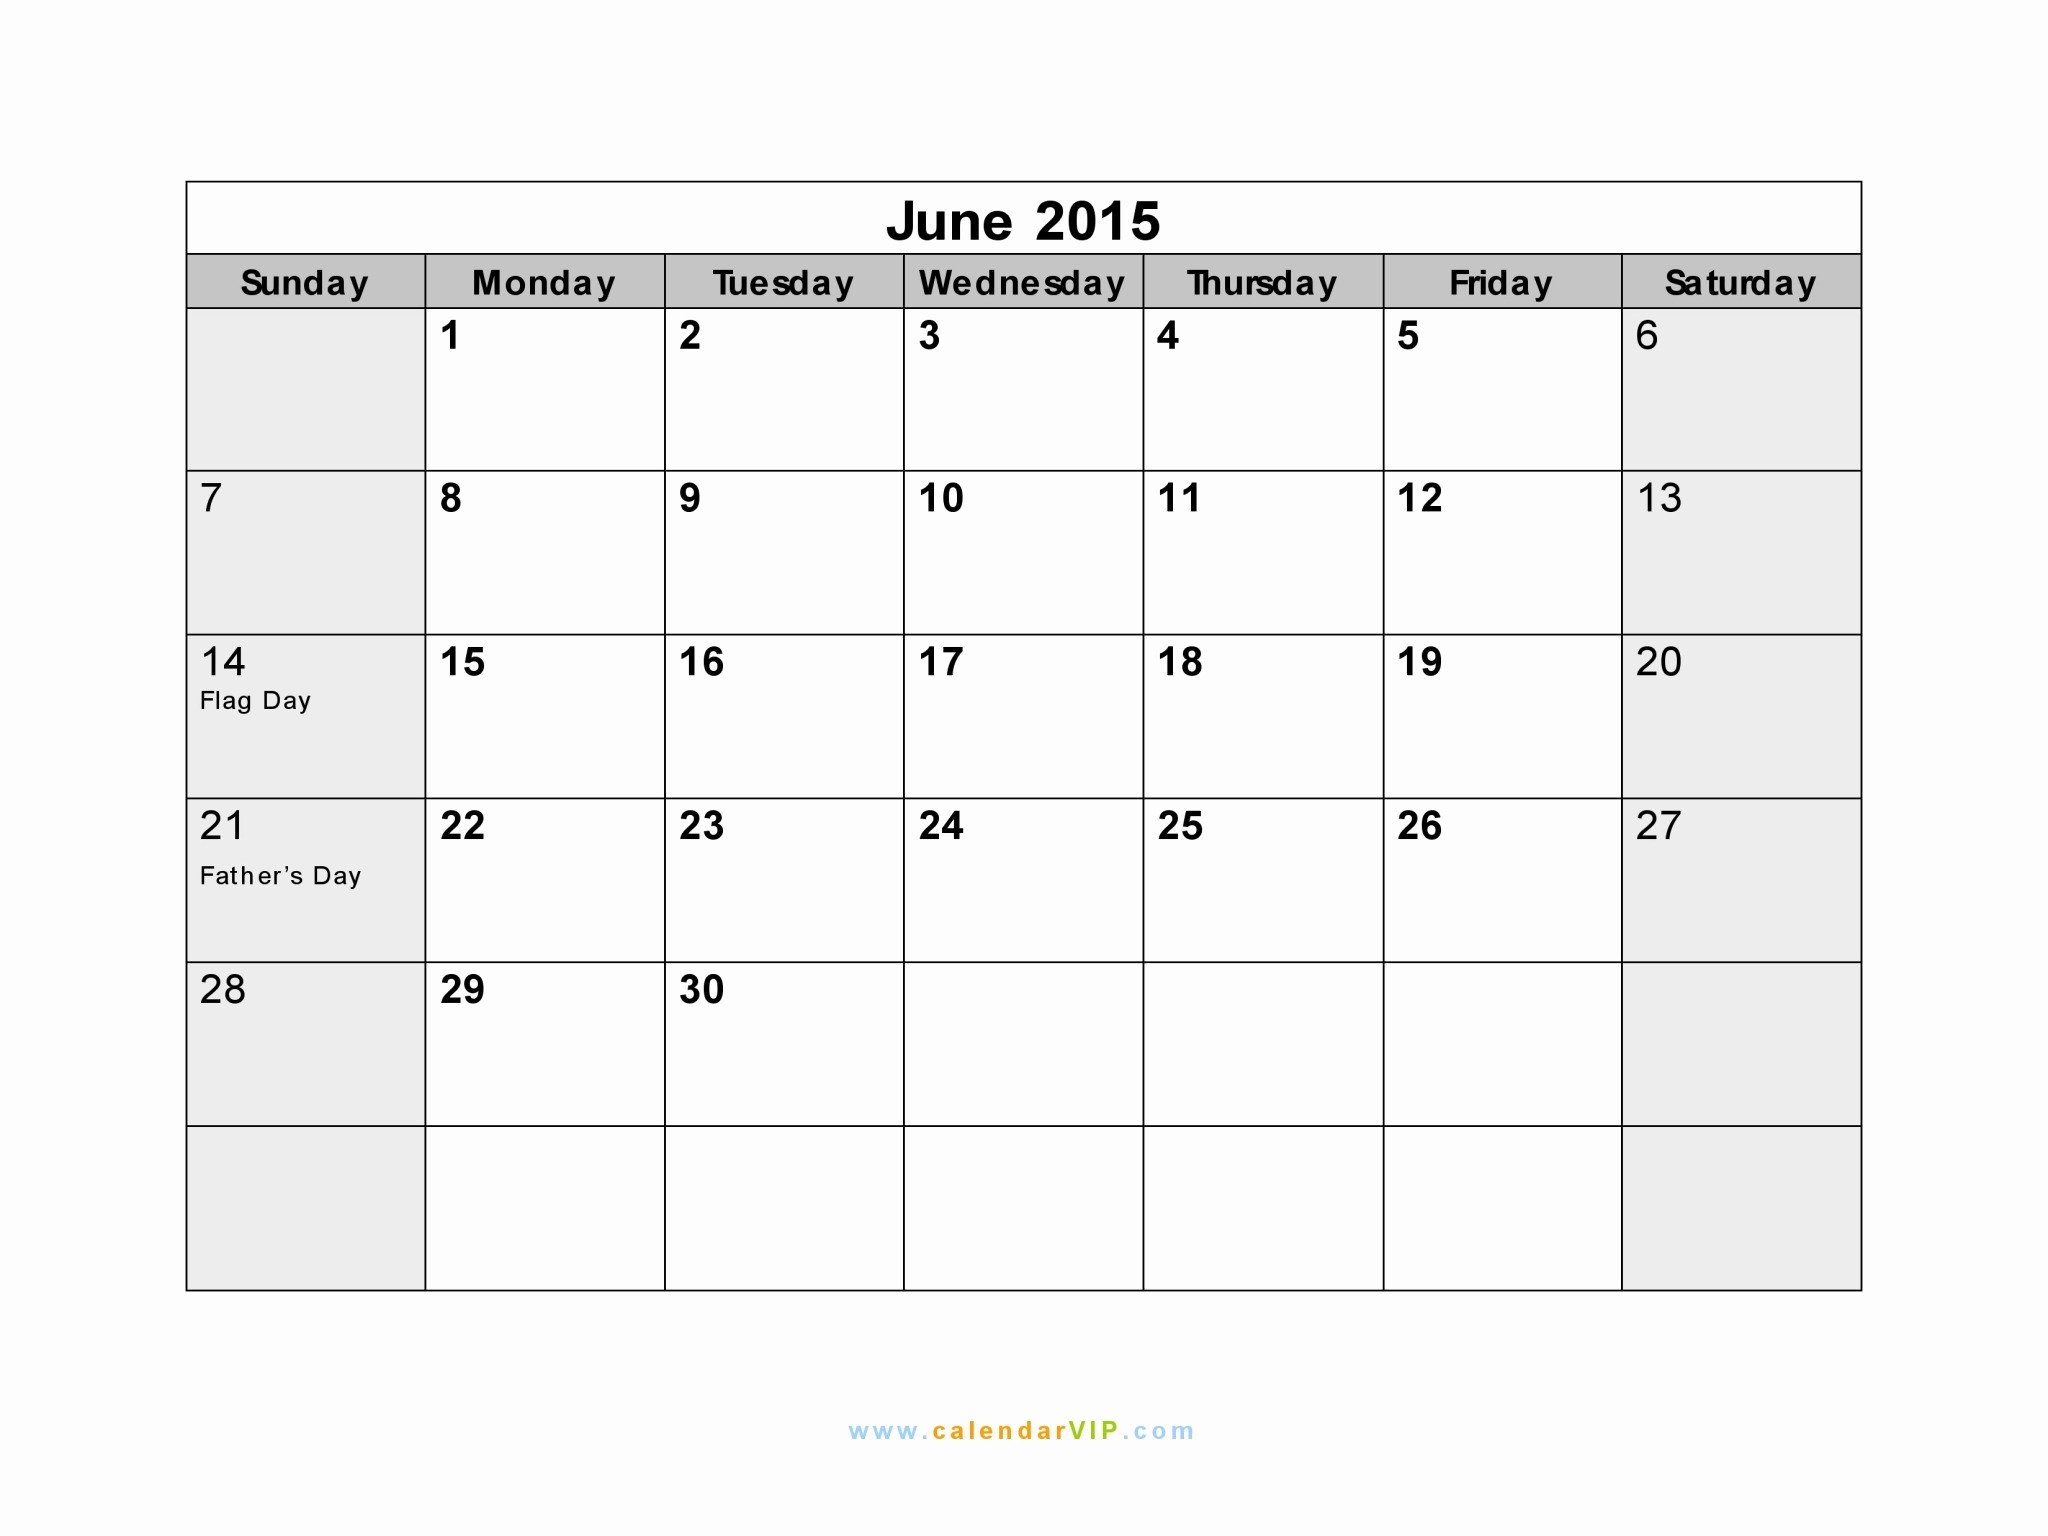 Calendar Template for June 2015 Fresh May 2015 Calendar with Holidays